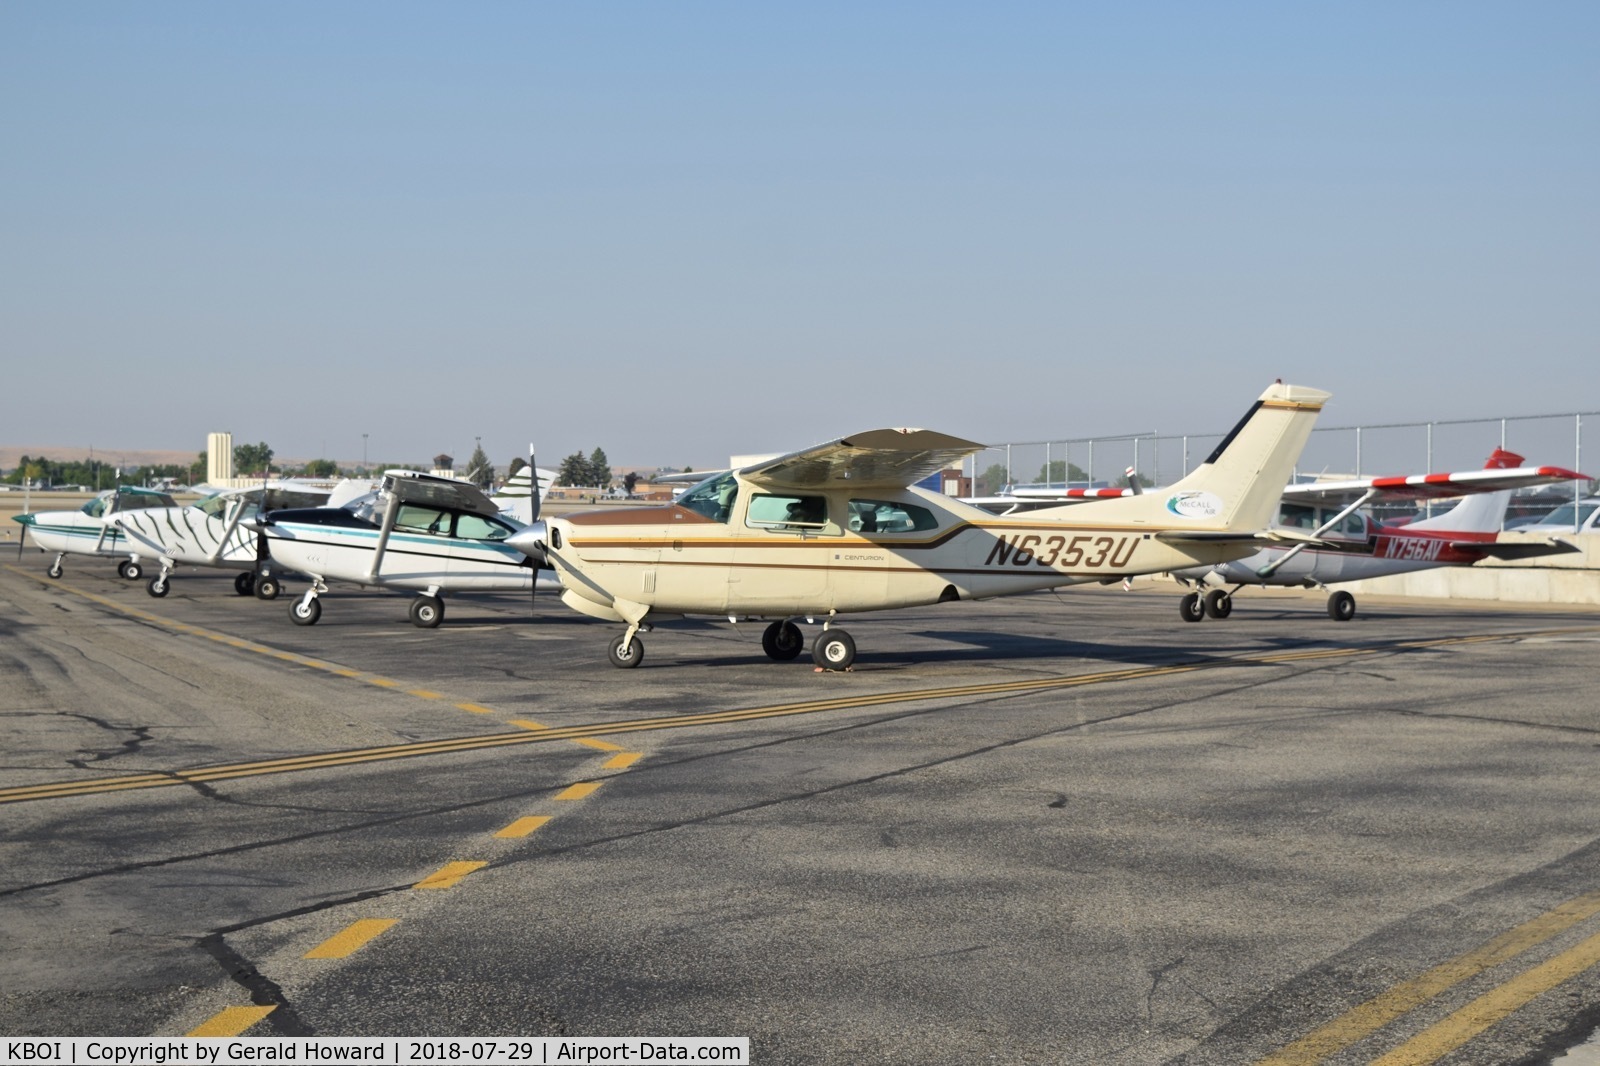 Boise Air Terminal/gowen Fld Airport (BOI) - Six back country aircraft parked on their ramp ready for the day's first flights.